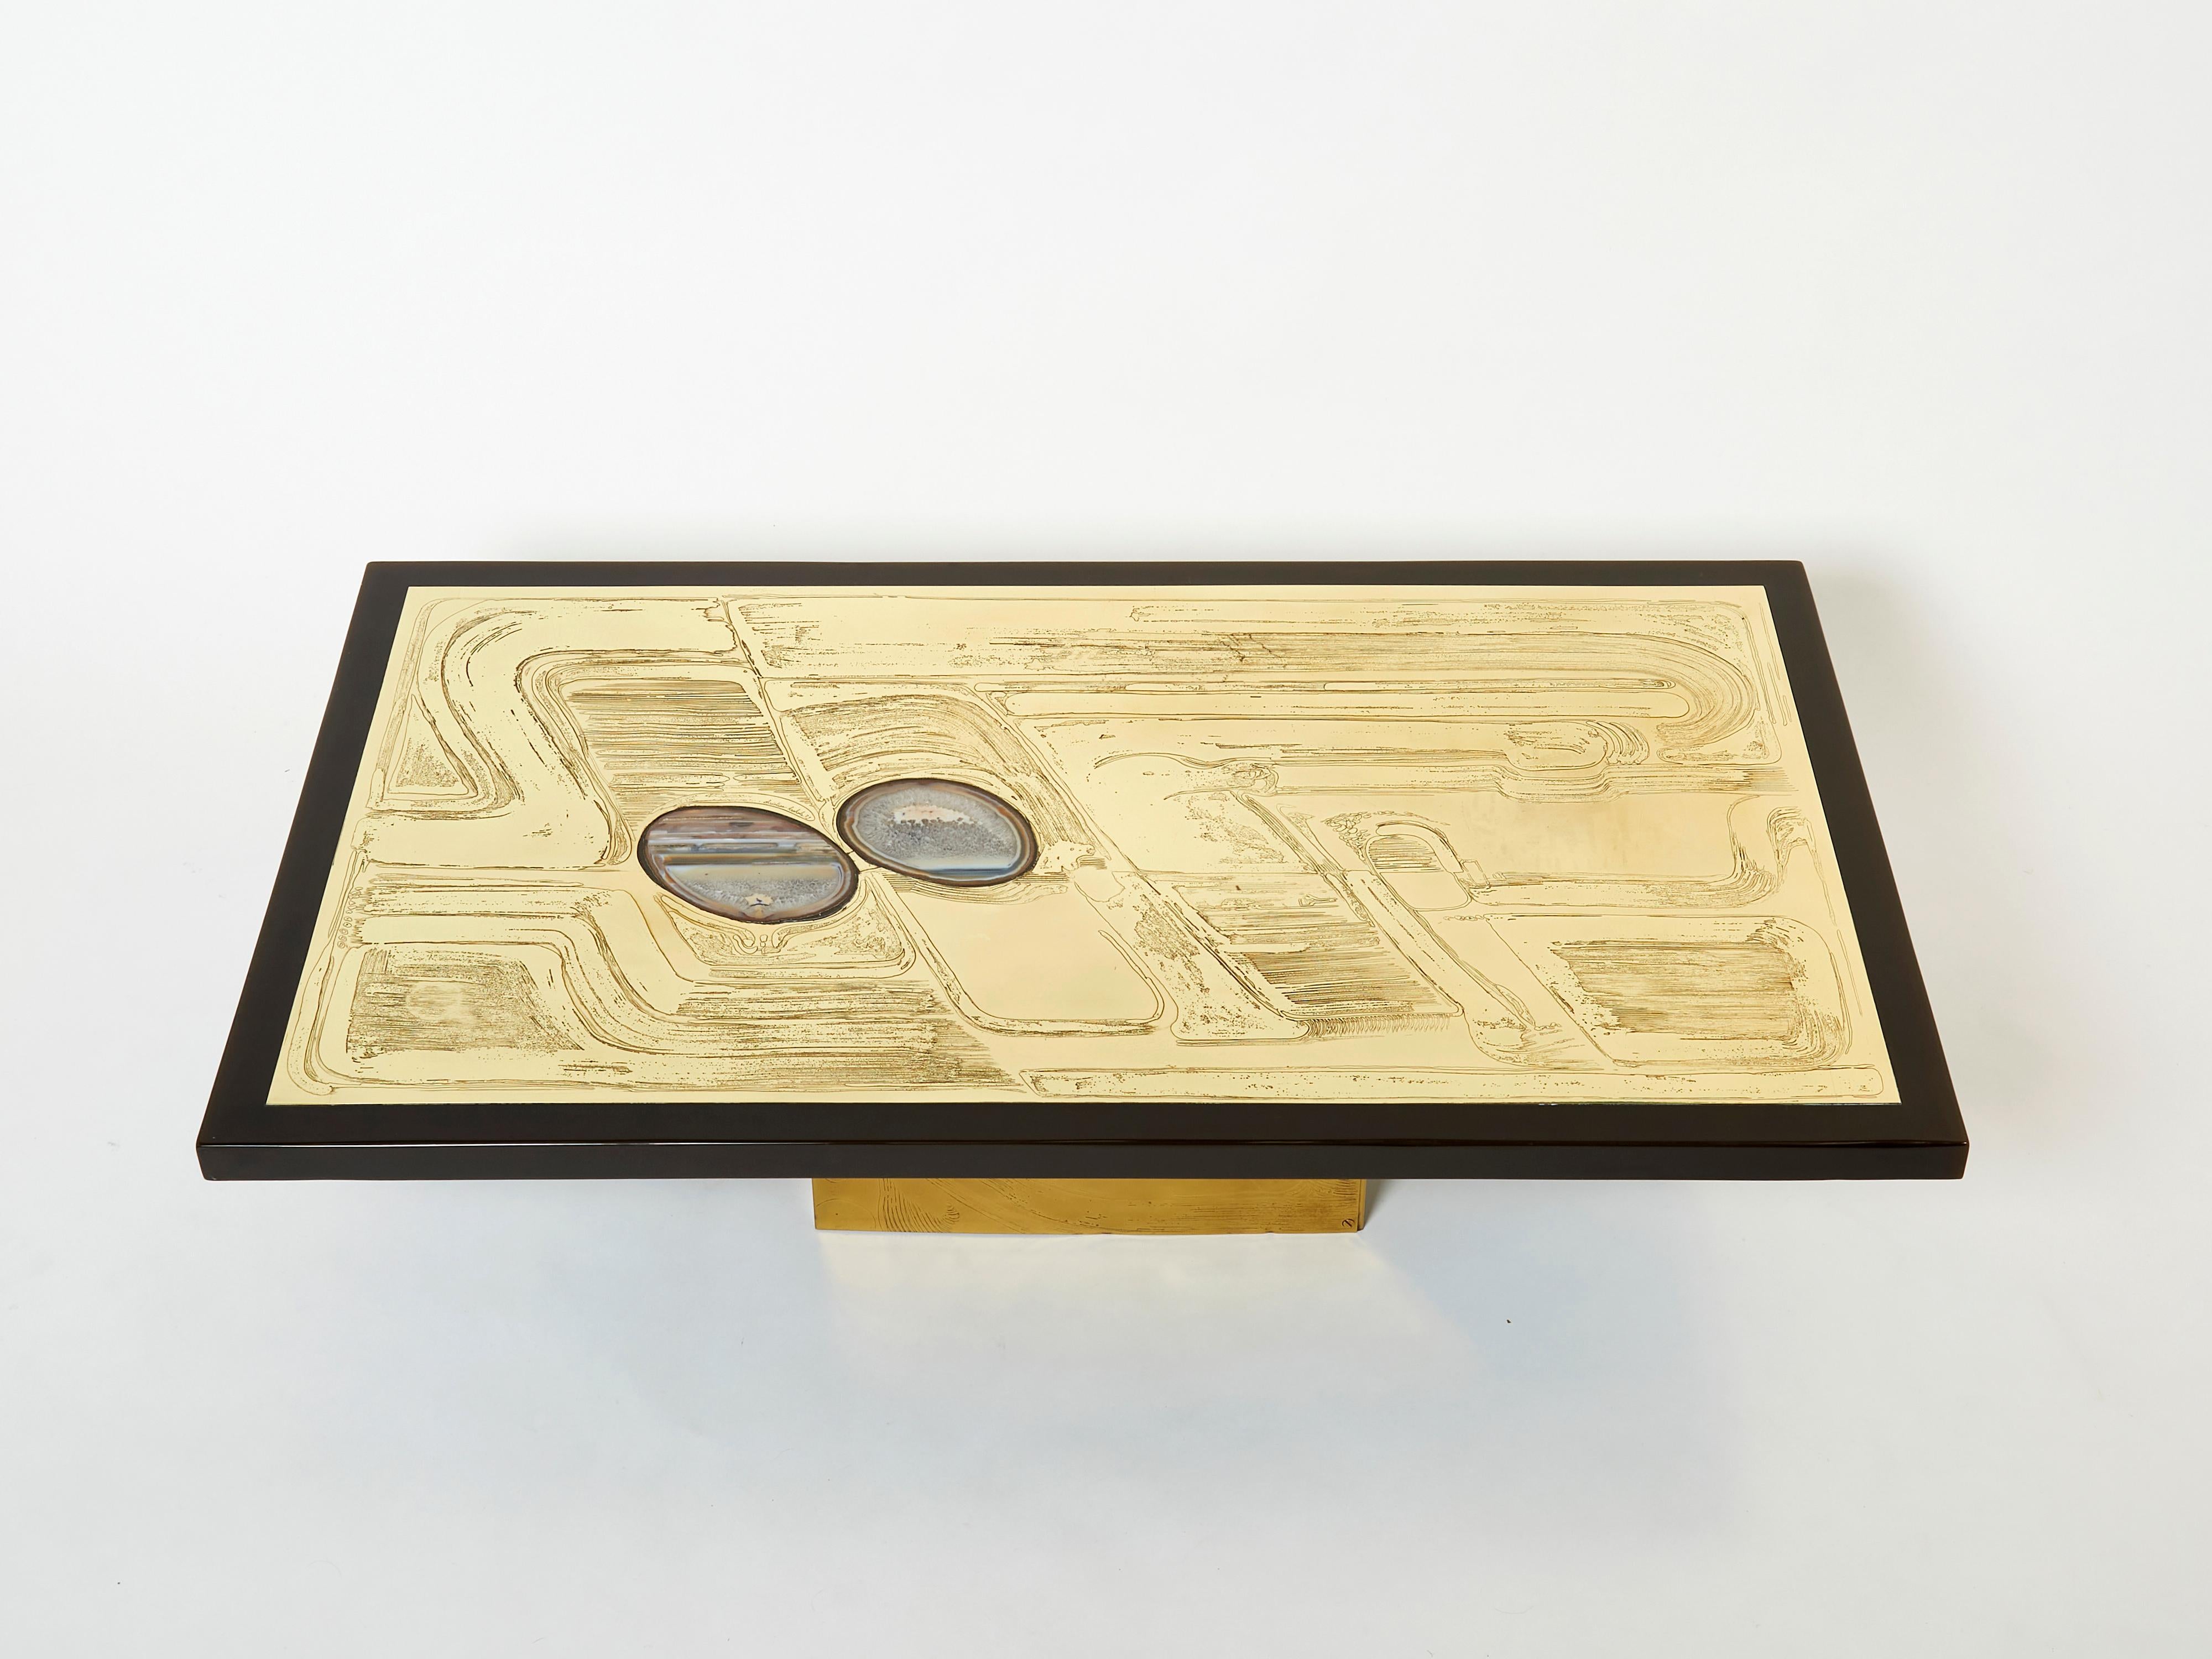 This is a beautiful Belgium coffee table signed by Christian Krekels in 1979. The table features a beautiful decorative etched brass table top, with two agate stones inlaid, framed by a dark brown resin insert. It is set on a large wood base,